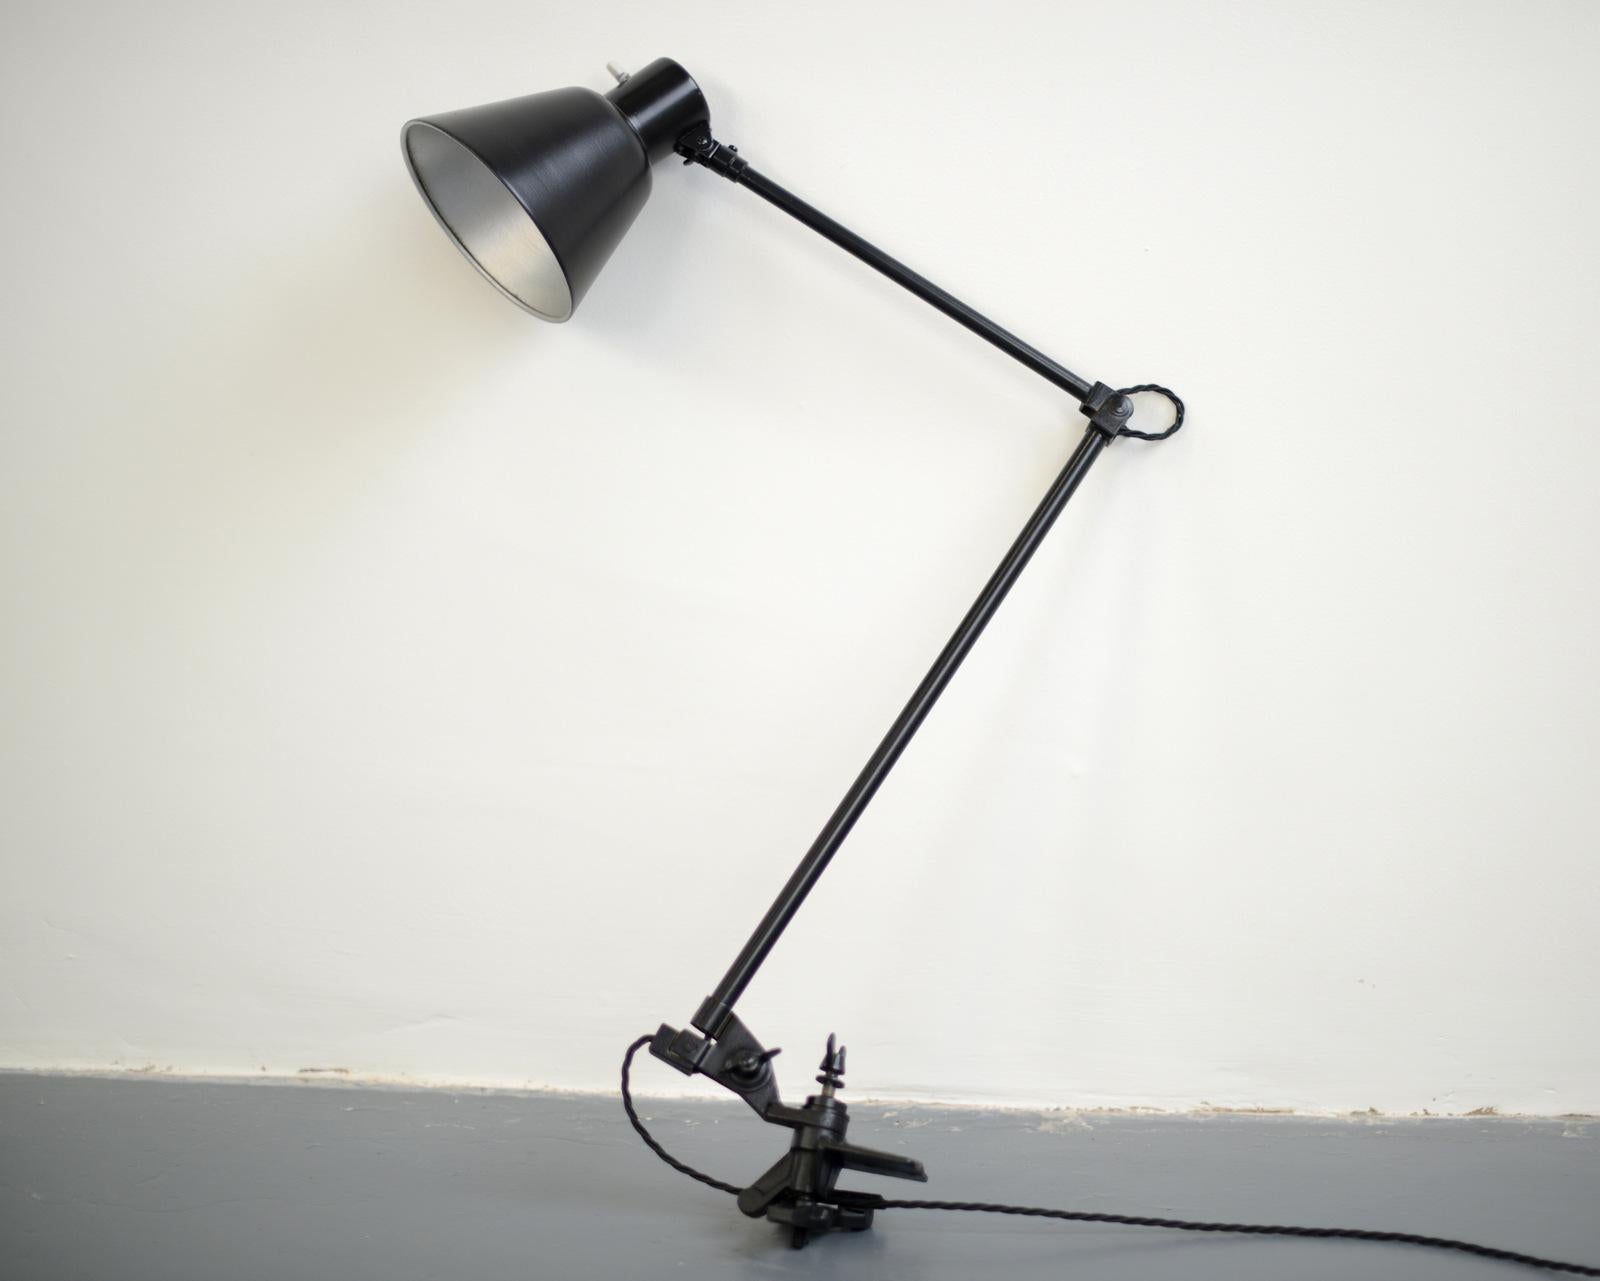 Clamp on industrial task lamp by Schaco, circa 1930s.

- Original porcelain switch
- Articulated arms
- Steel shade
- By Schanzenbach & Co, Frankfurt
- German ~ 1930s
- Measures: 91cm tall x 16cm wide x 45cm deep

Condition report

Fully